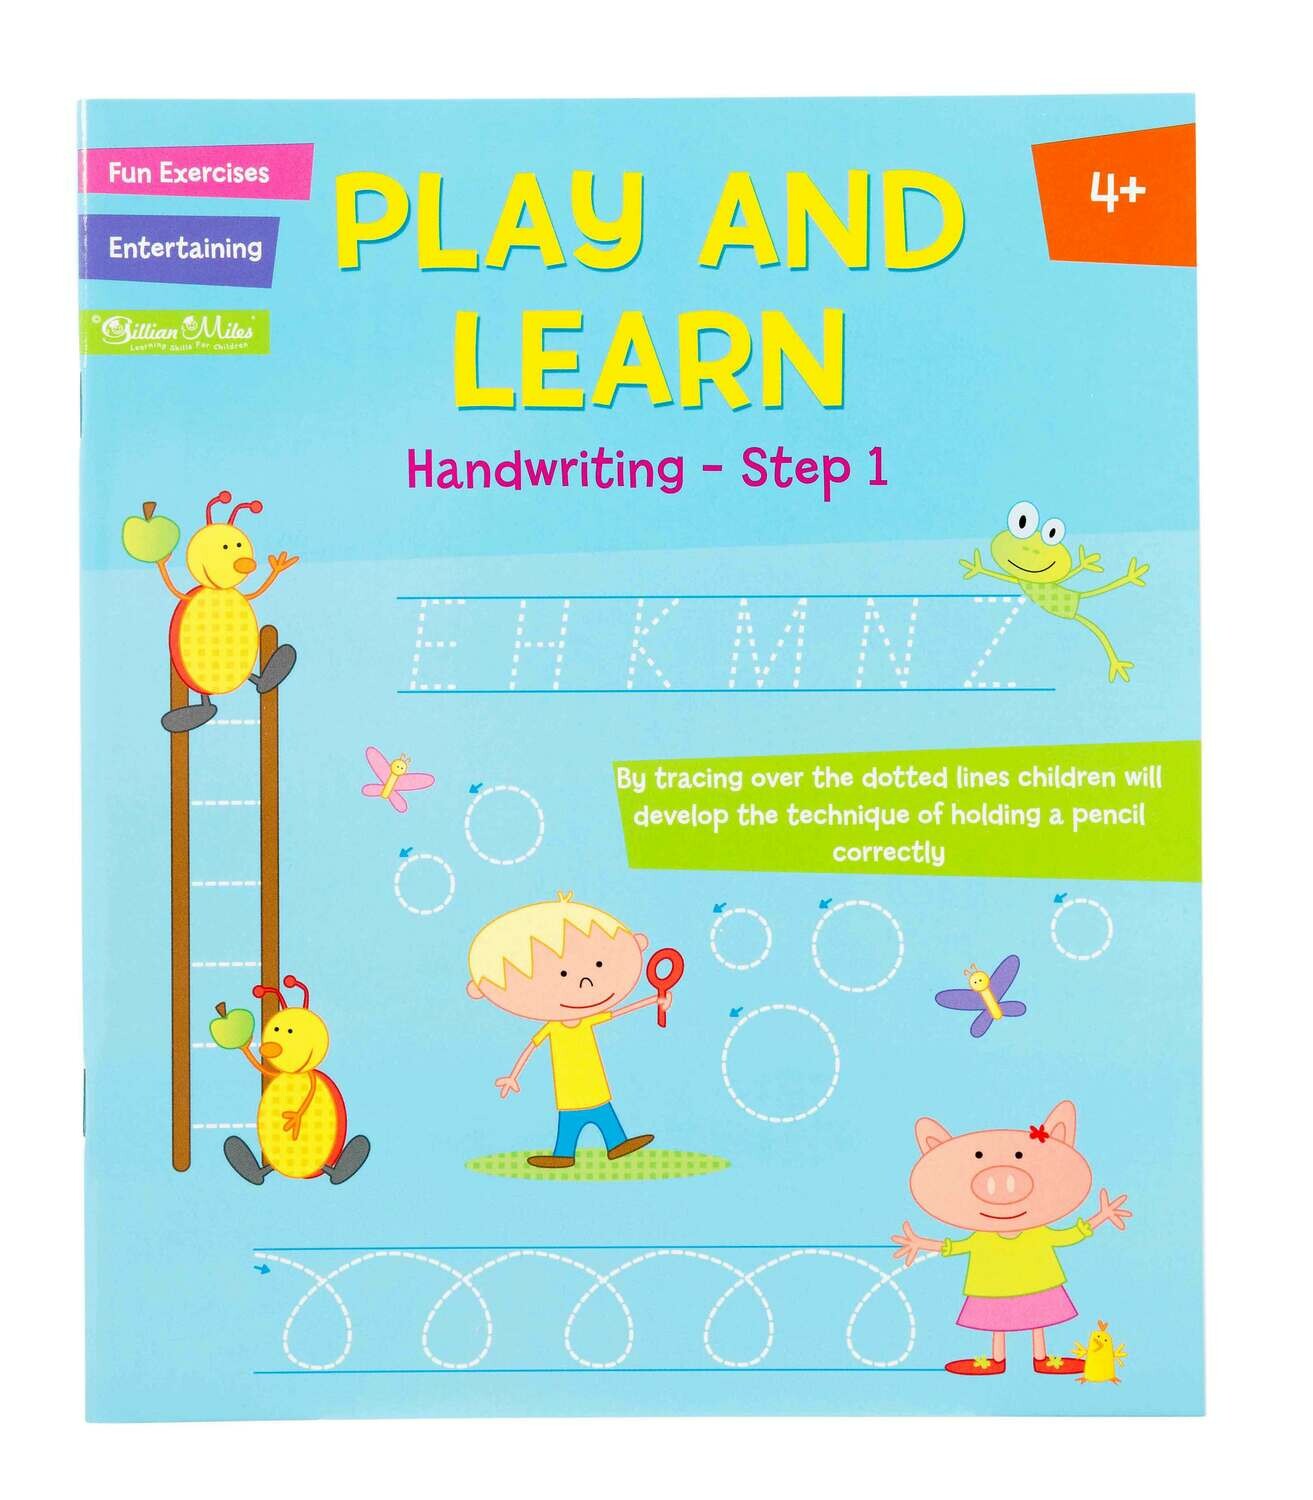 Play and Learn Activity- Handwriting Step